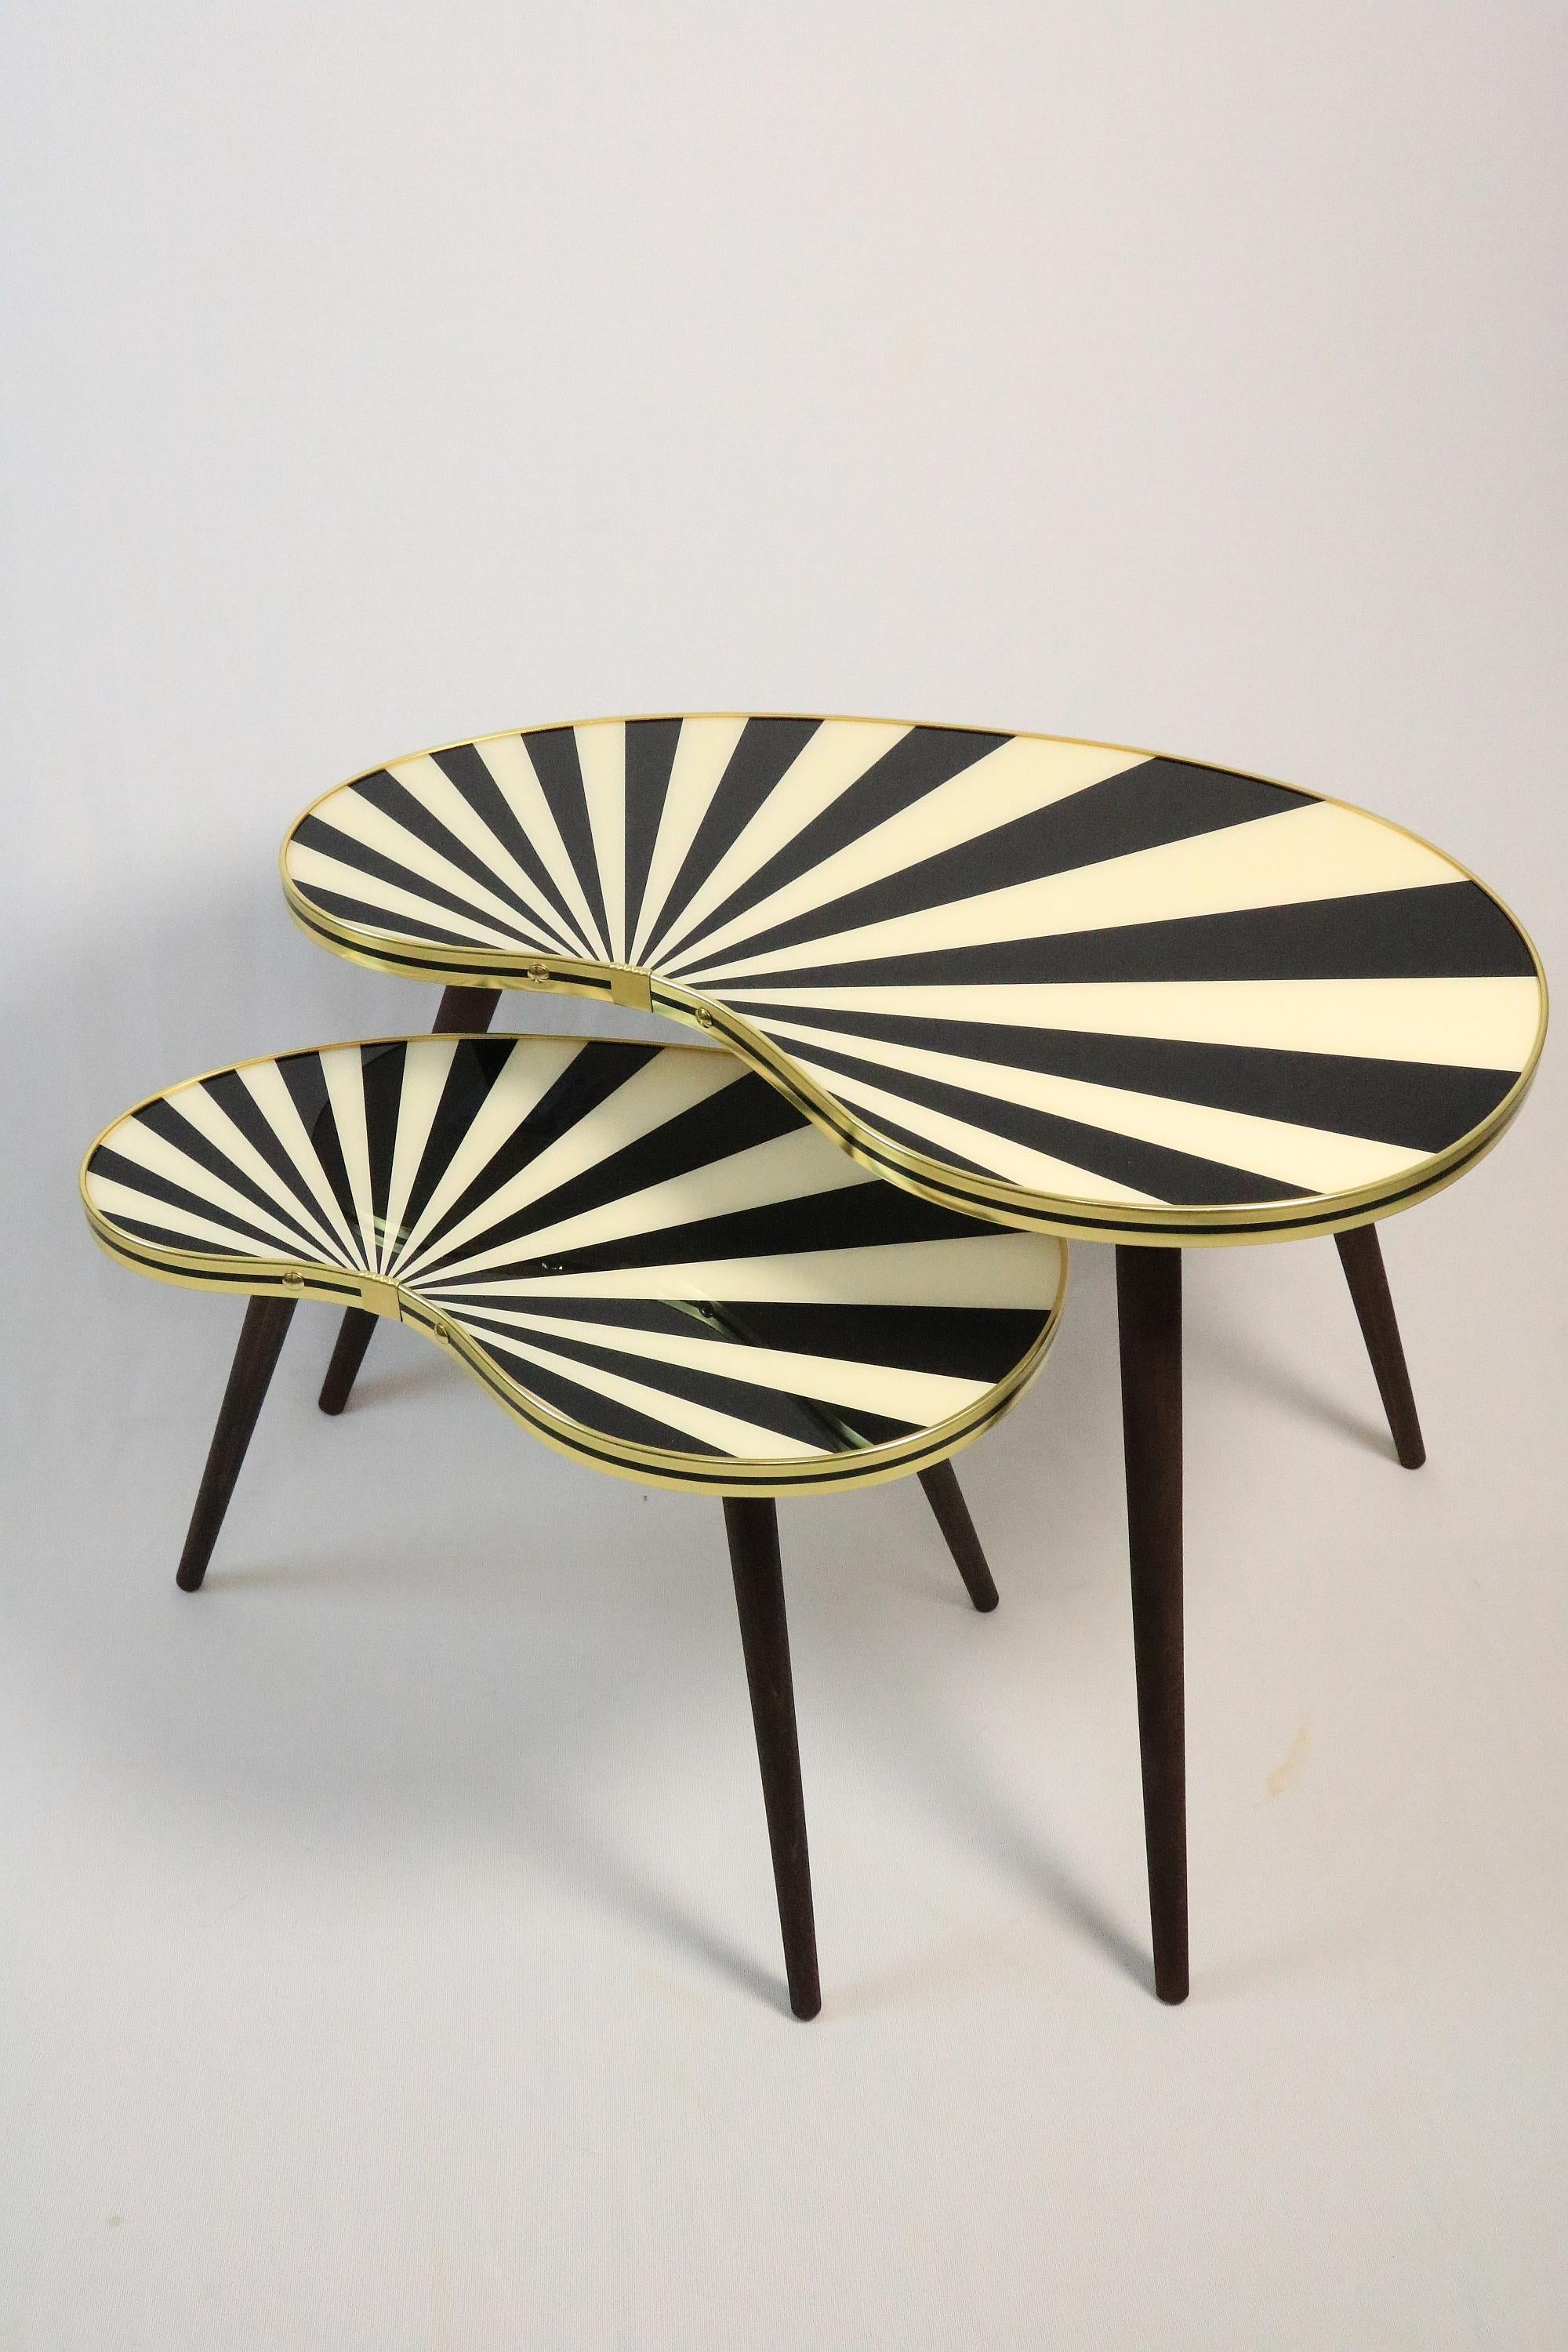 Contemporary Large Side Table, Kidney Shaped, Black-White Stripes, 3 Elegant Legs, 50s Style